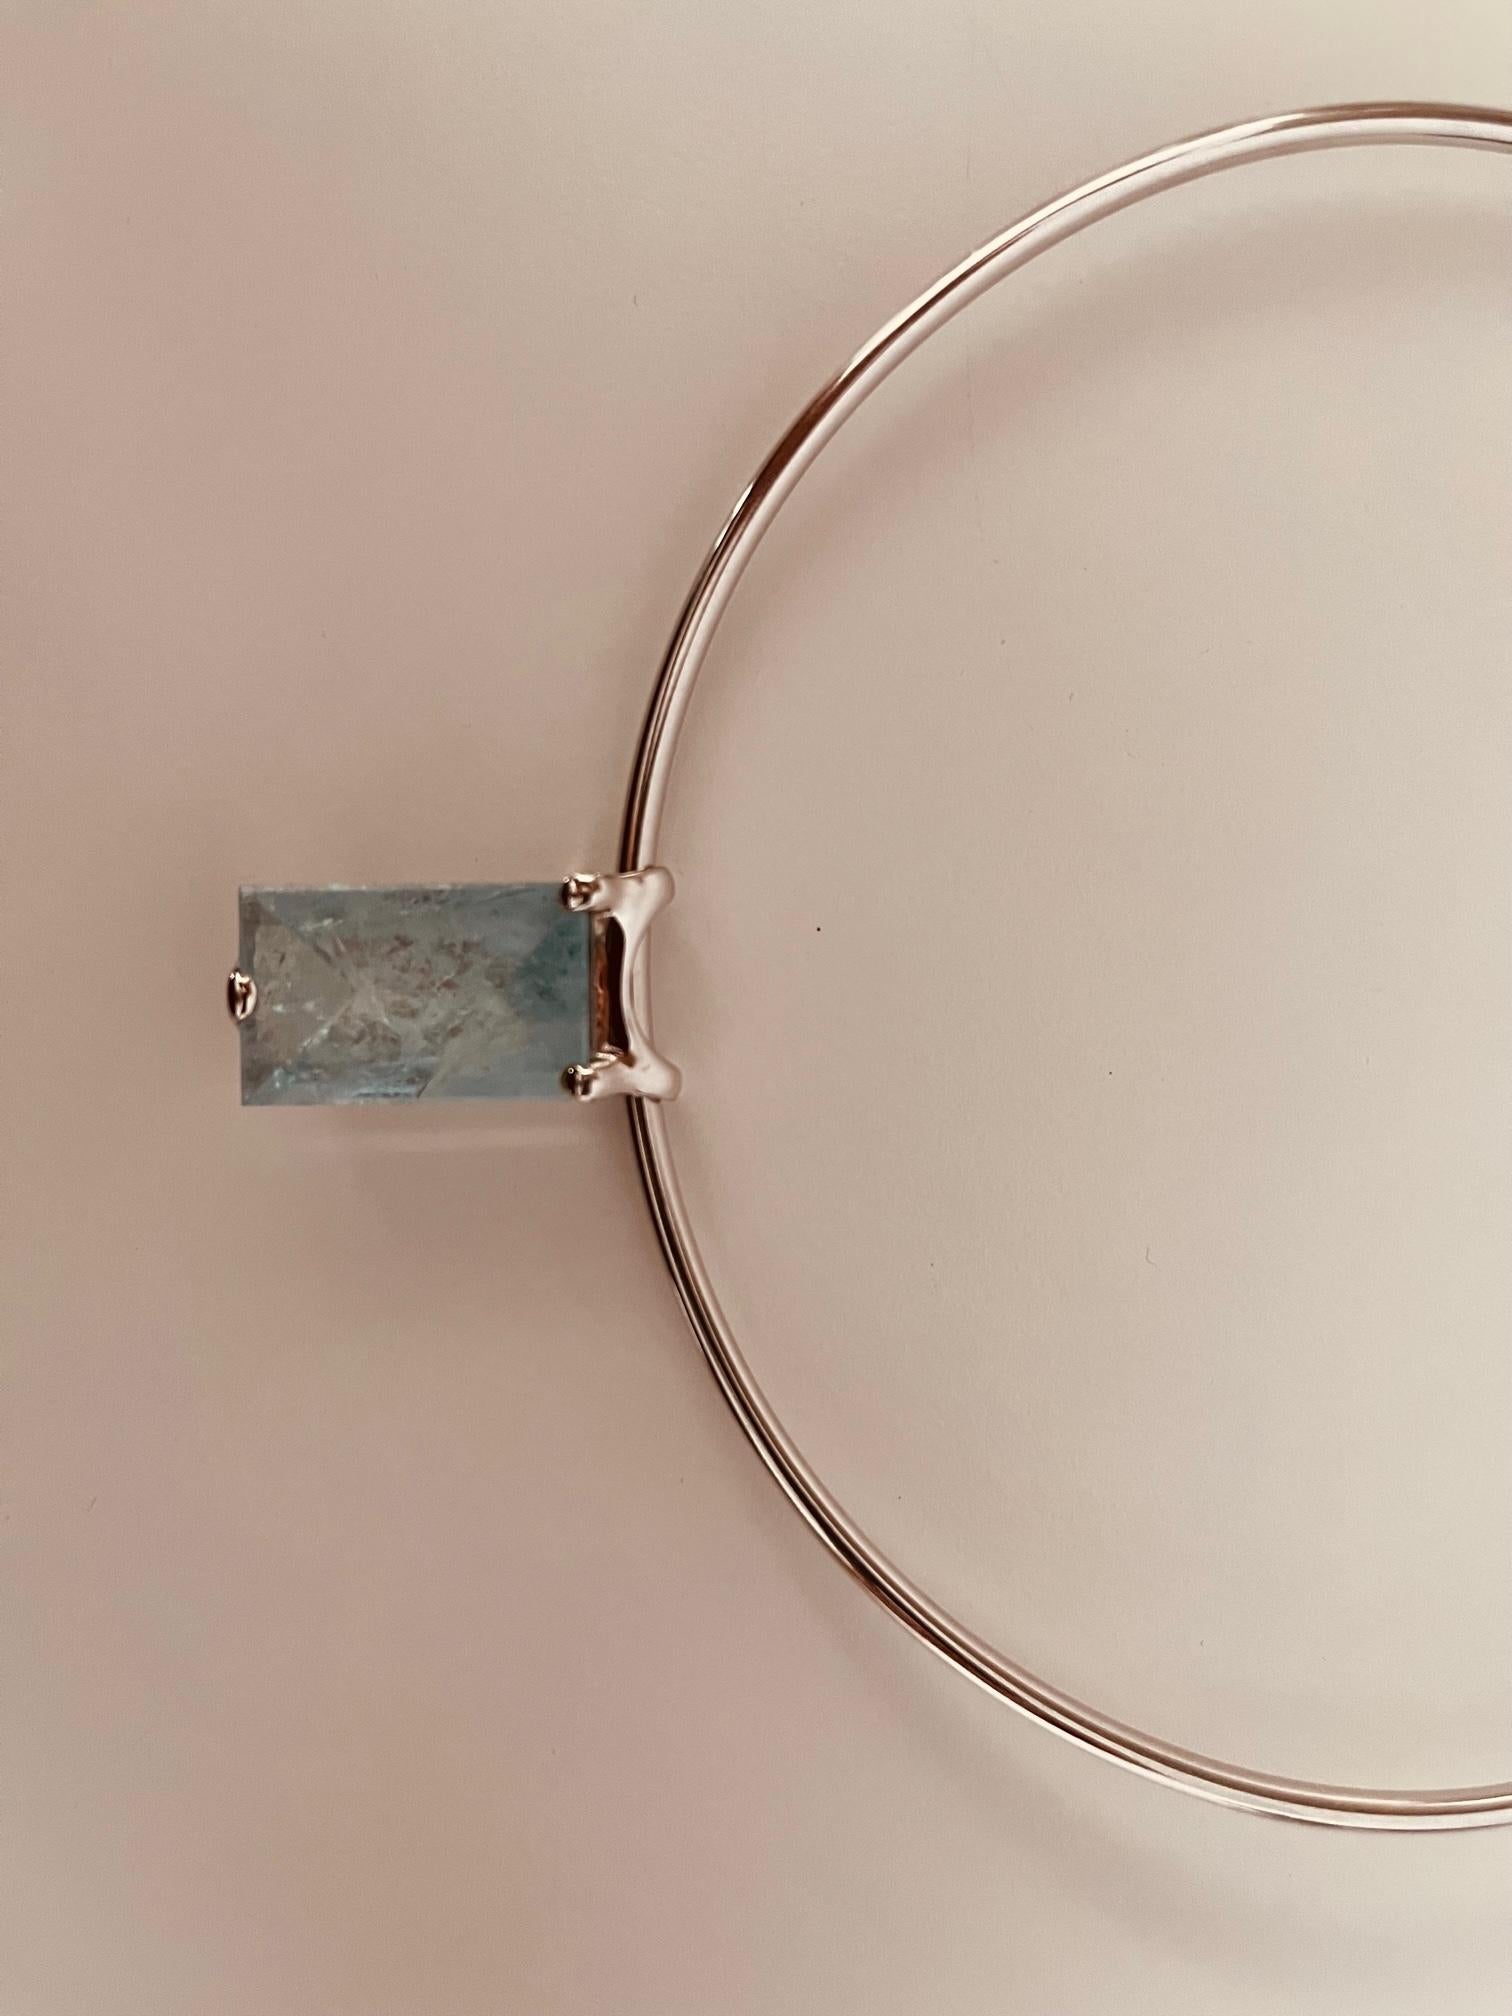 Mixed Cut 18 Carat White Gold Choker, 12cm Diameter, With Aquamarine Removable Pendant For Sale